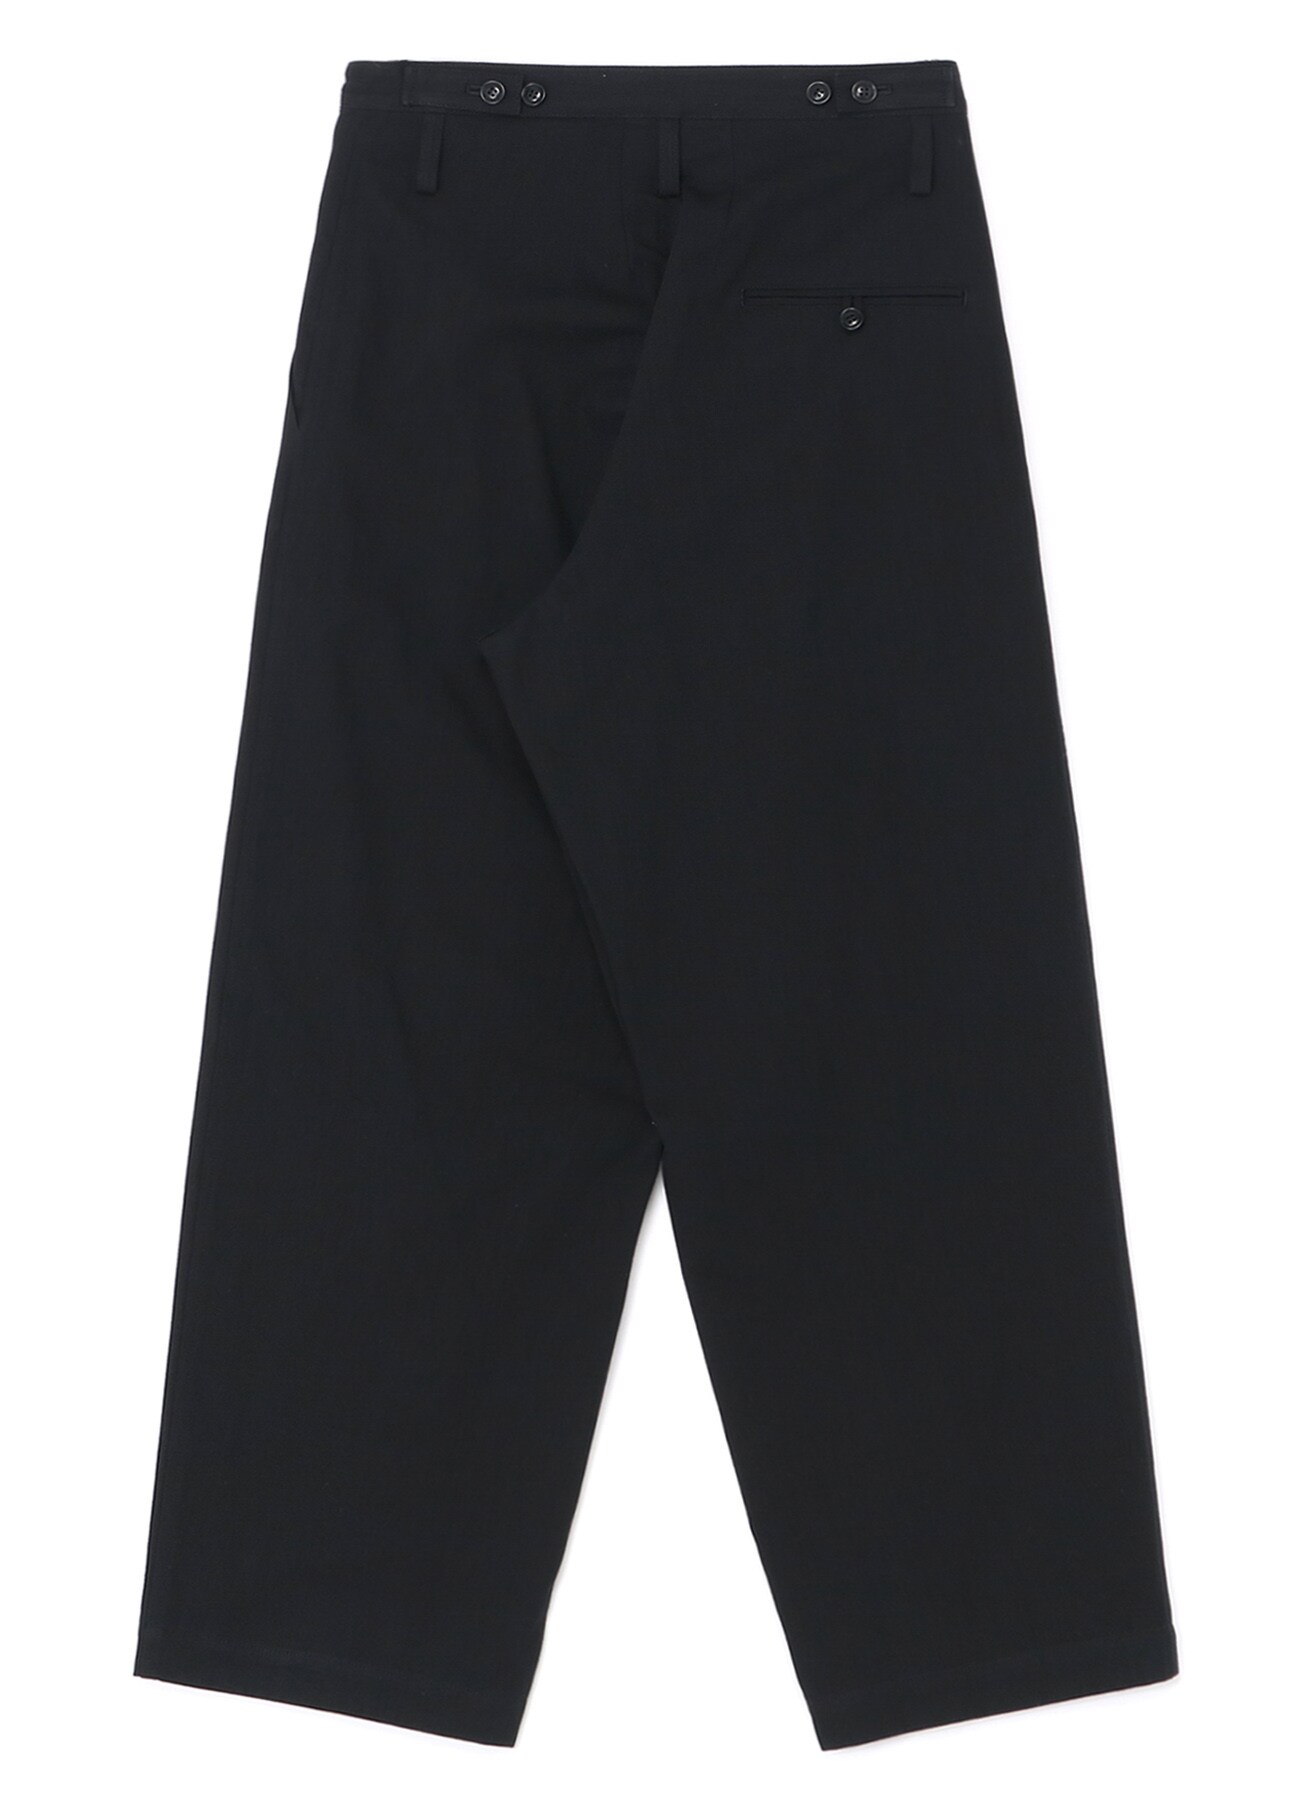 Ted Baker | Popieyt Tapered Trousers | Black | SportsDirect.com